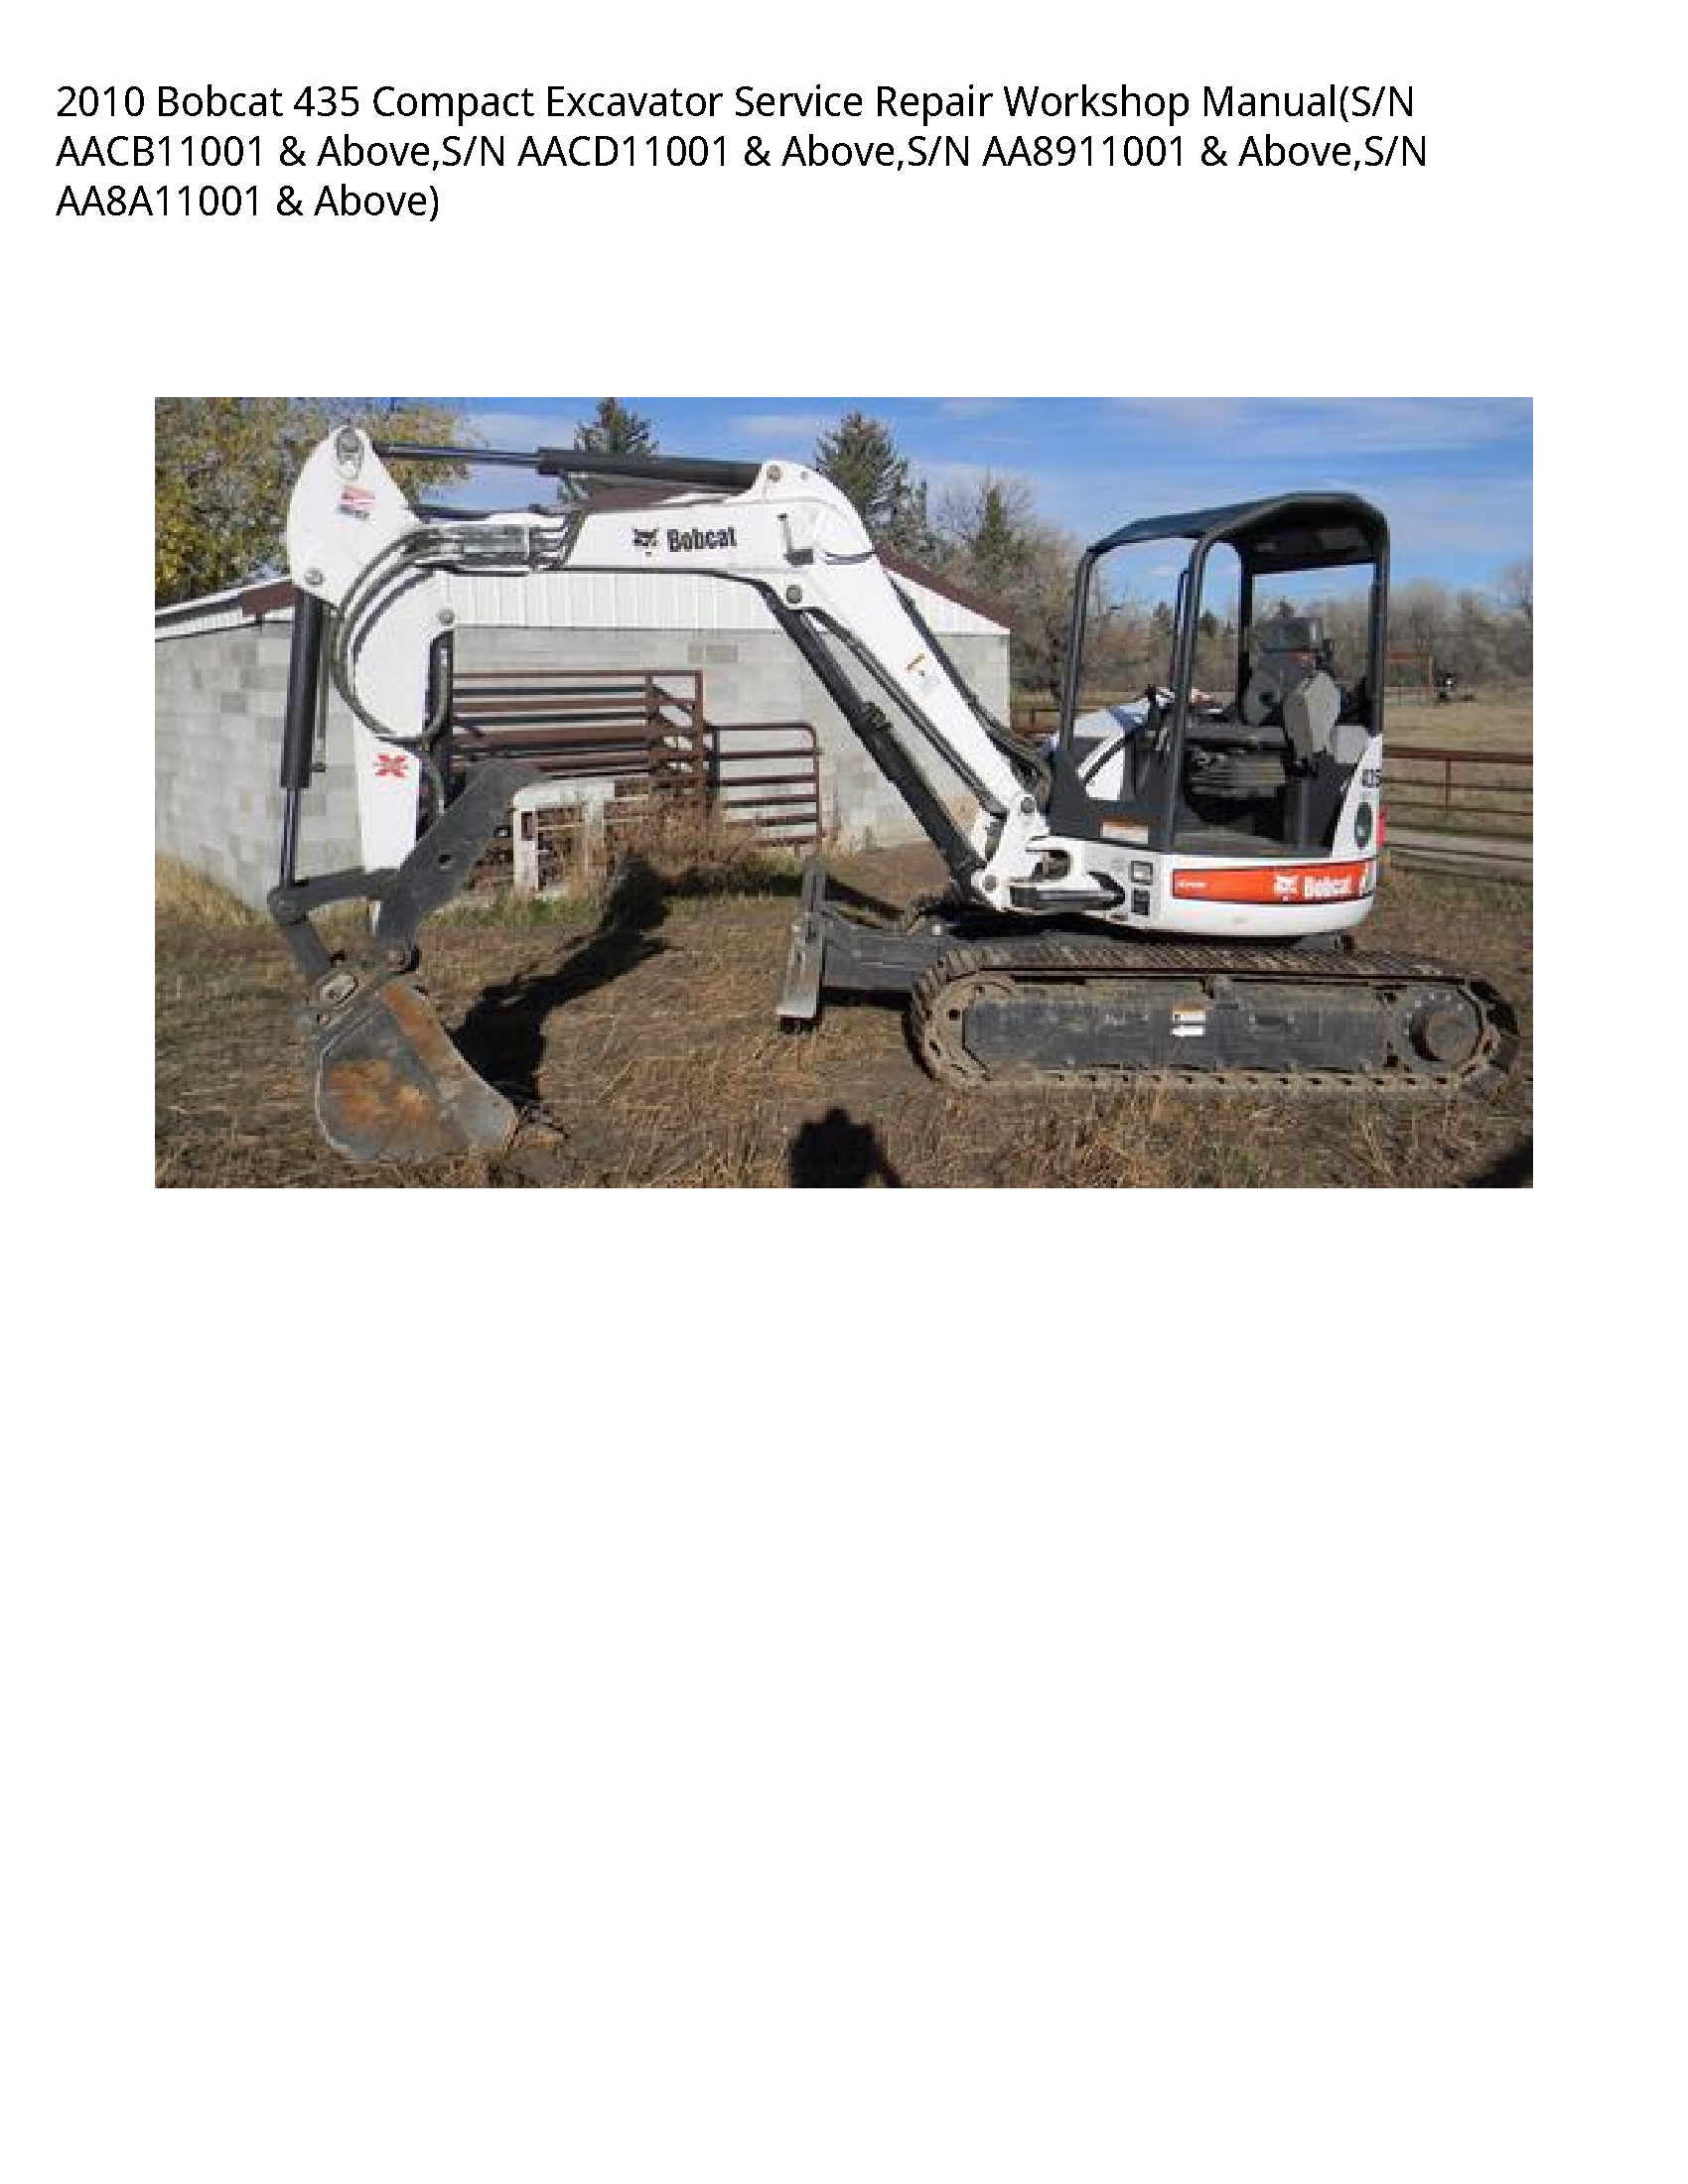 2010 Bobcat 435 Compact Excavator Service Repair Workshop Manual(S/N AACB11001 & Above S/N AACD11001 & Above S/N AA8911001 & Above S/N AA8A11001 & Above)